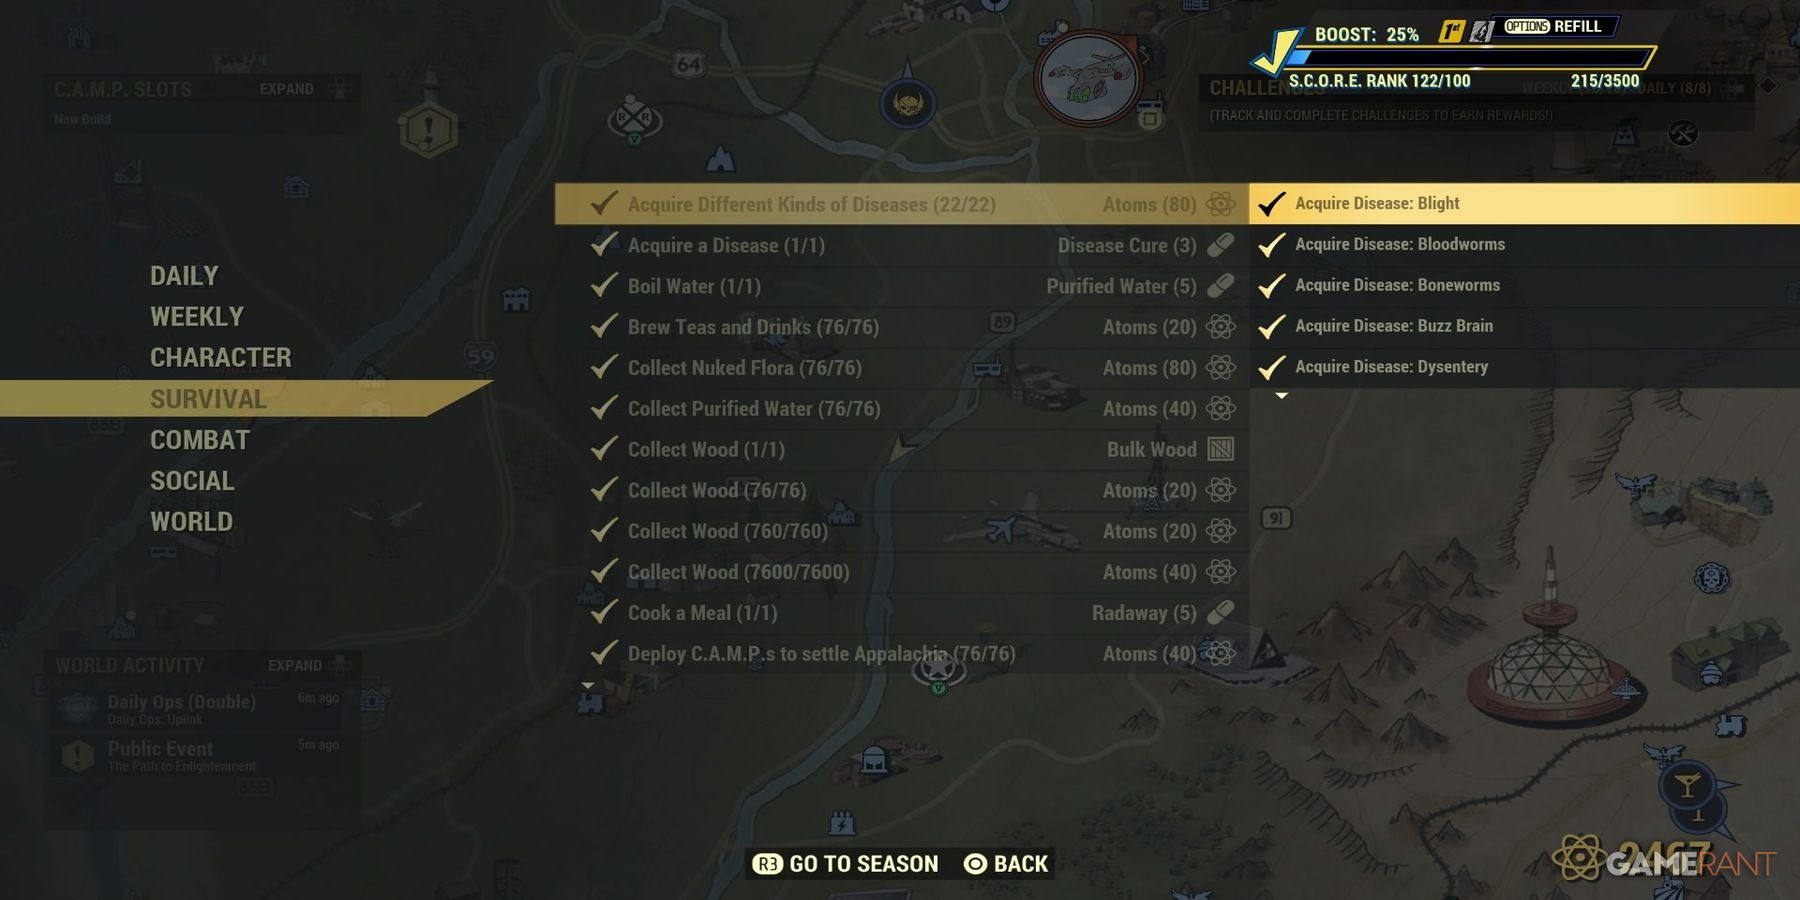 Survival Challenges in Fallout 76